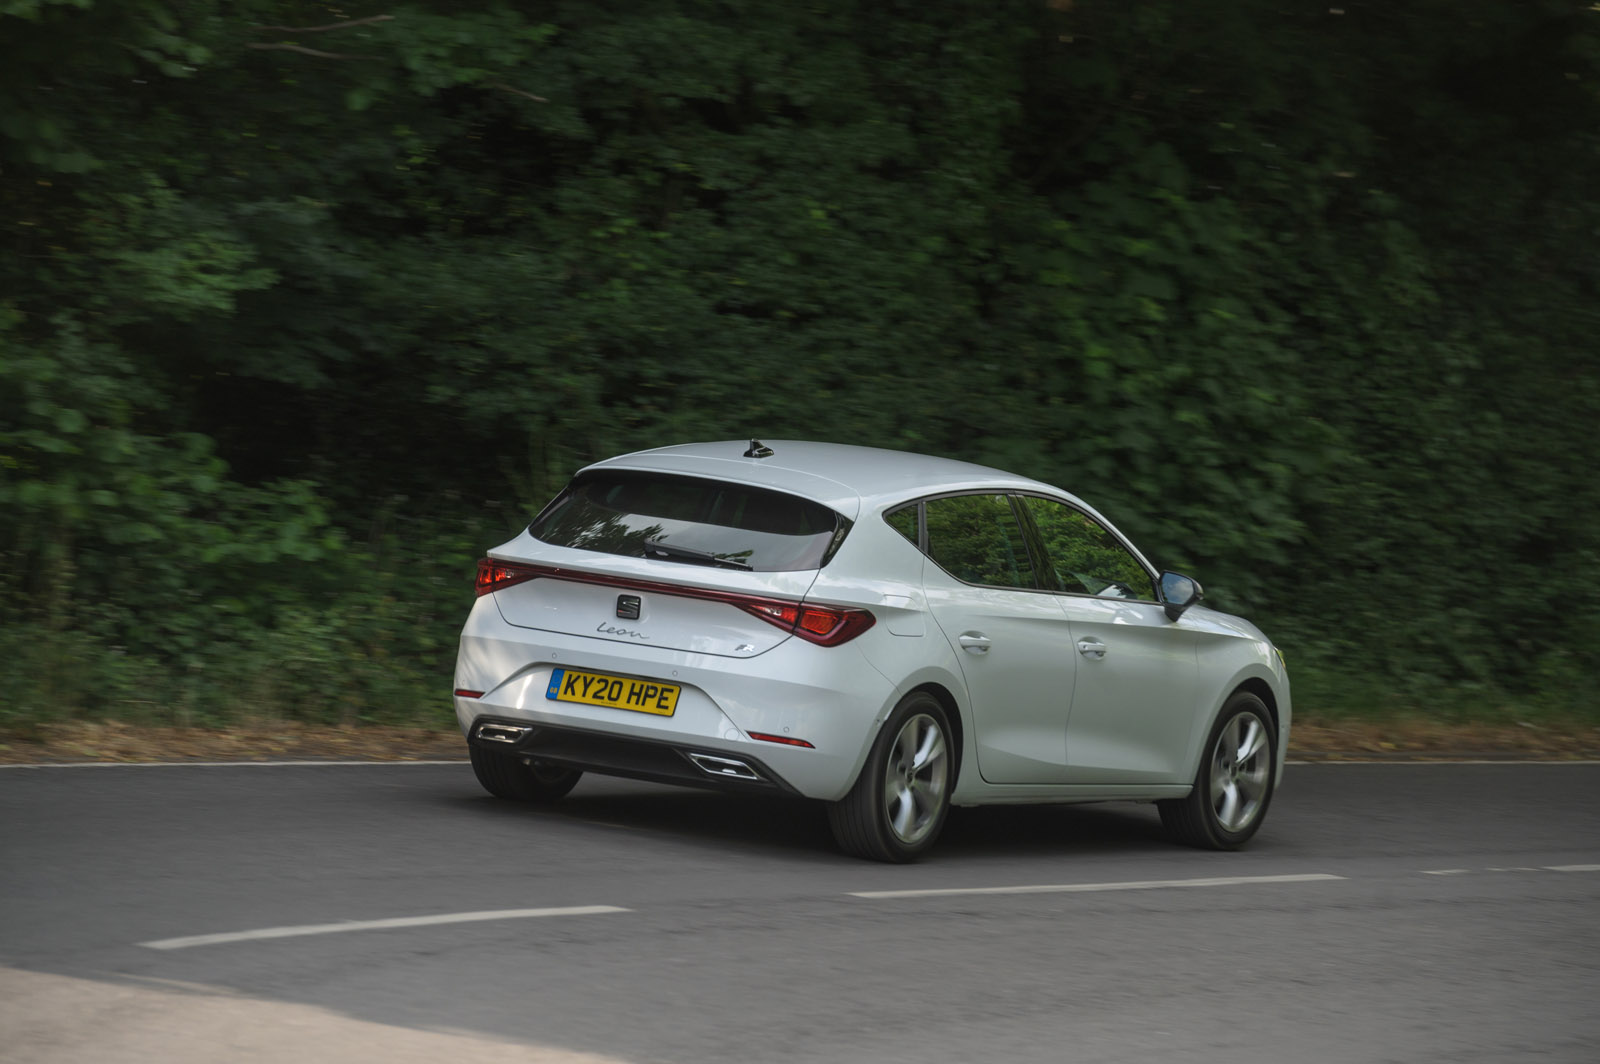 2021 Seat Leon Gains New Petrol And Diesel Engines In The UK